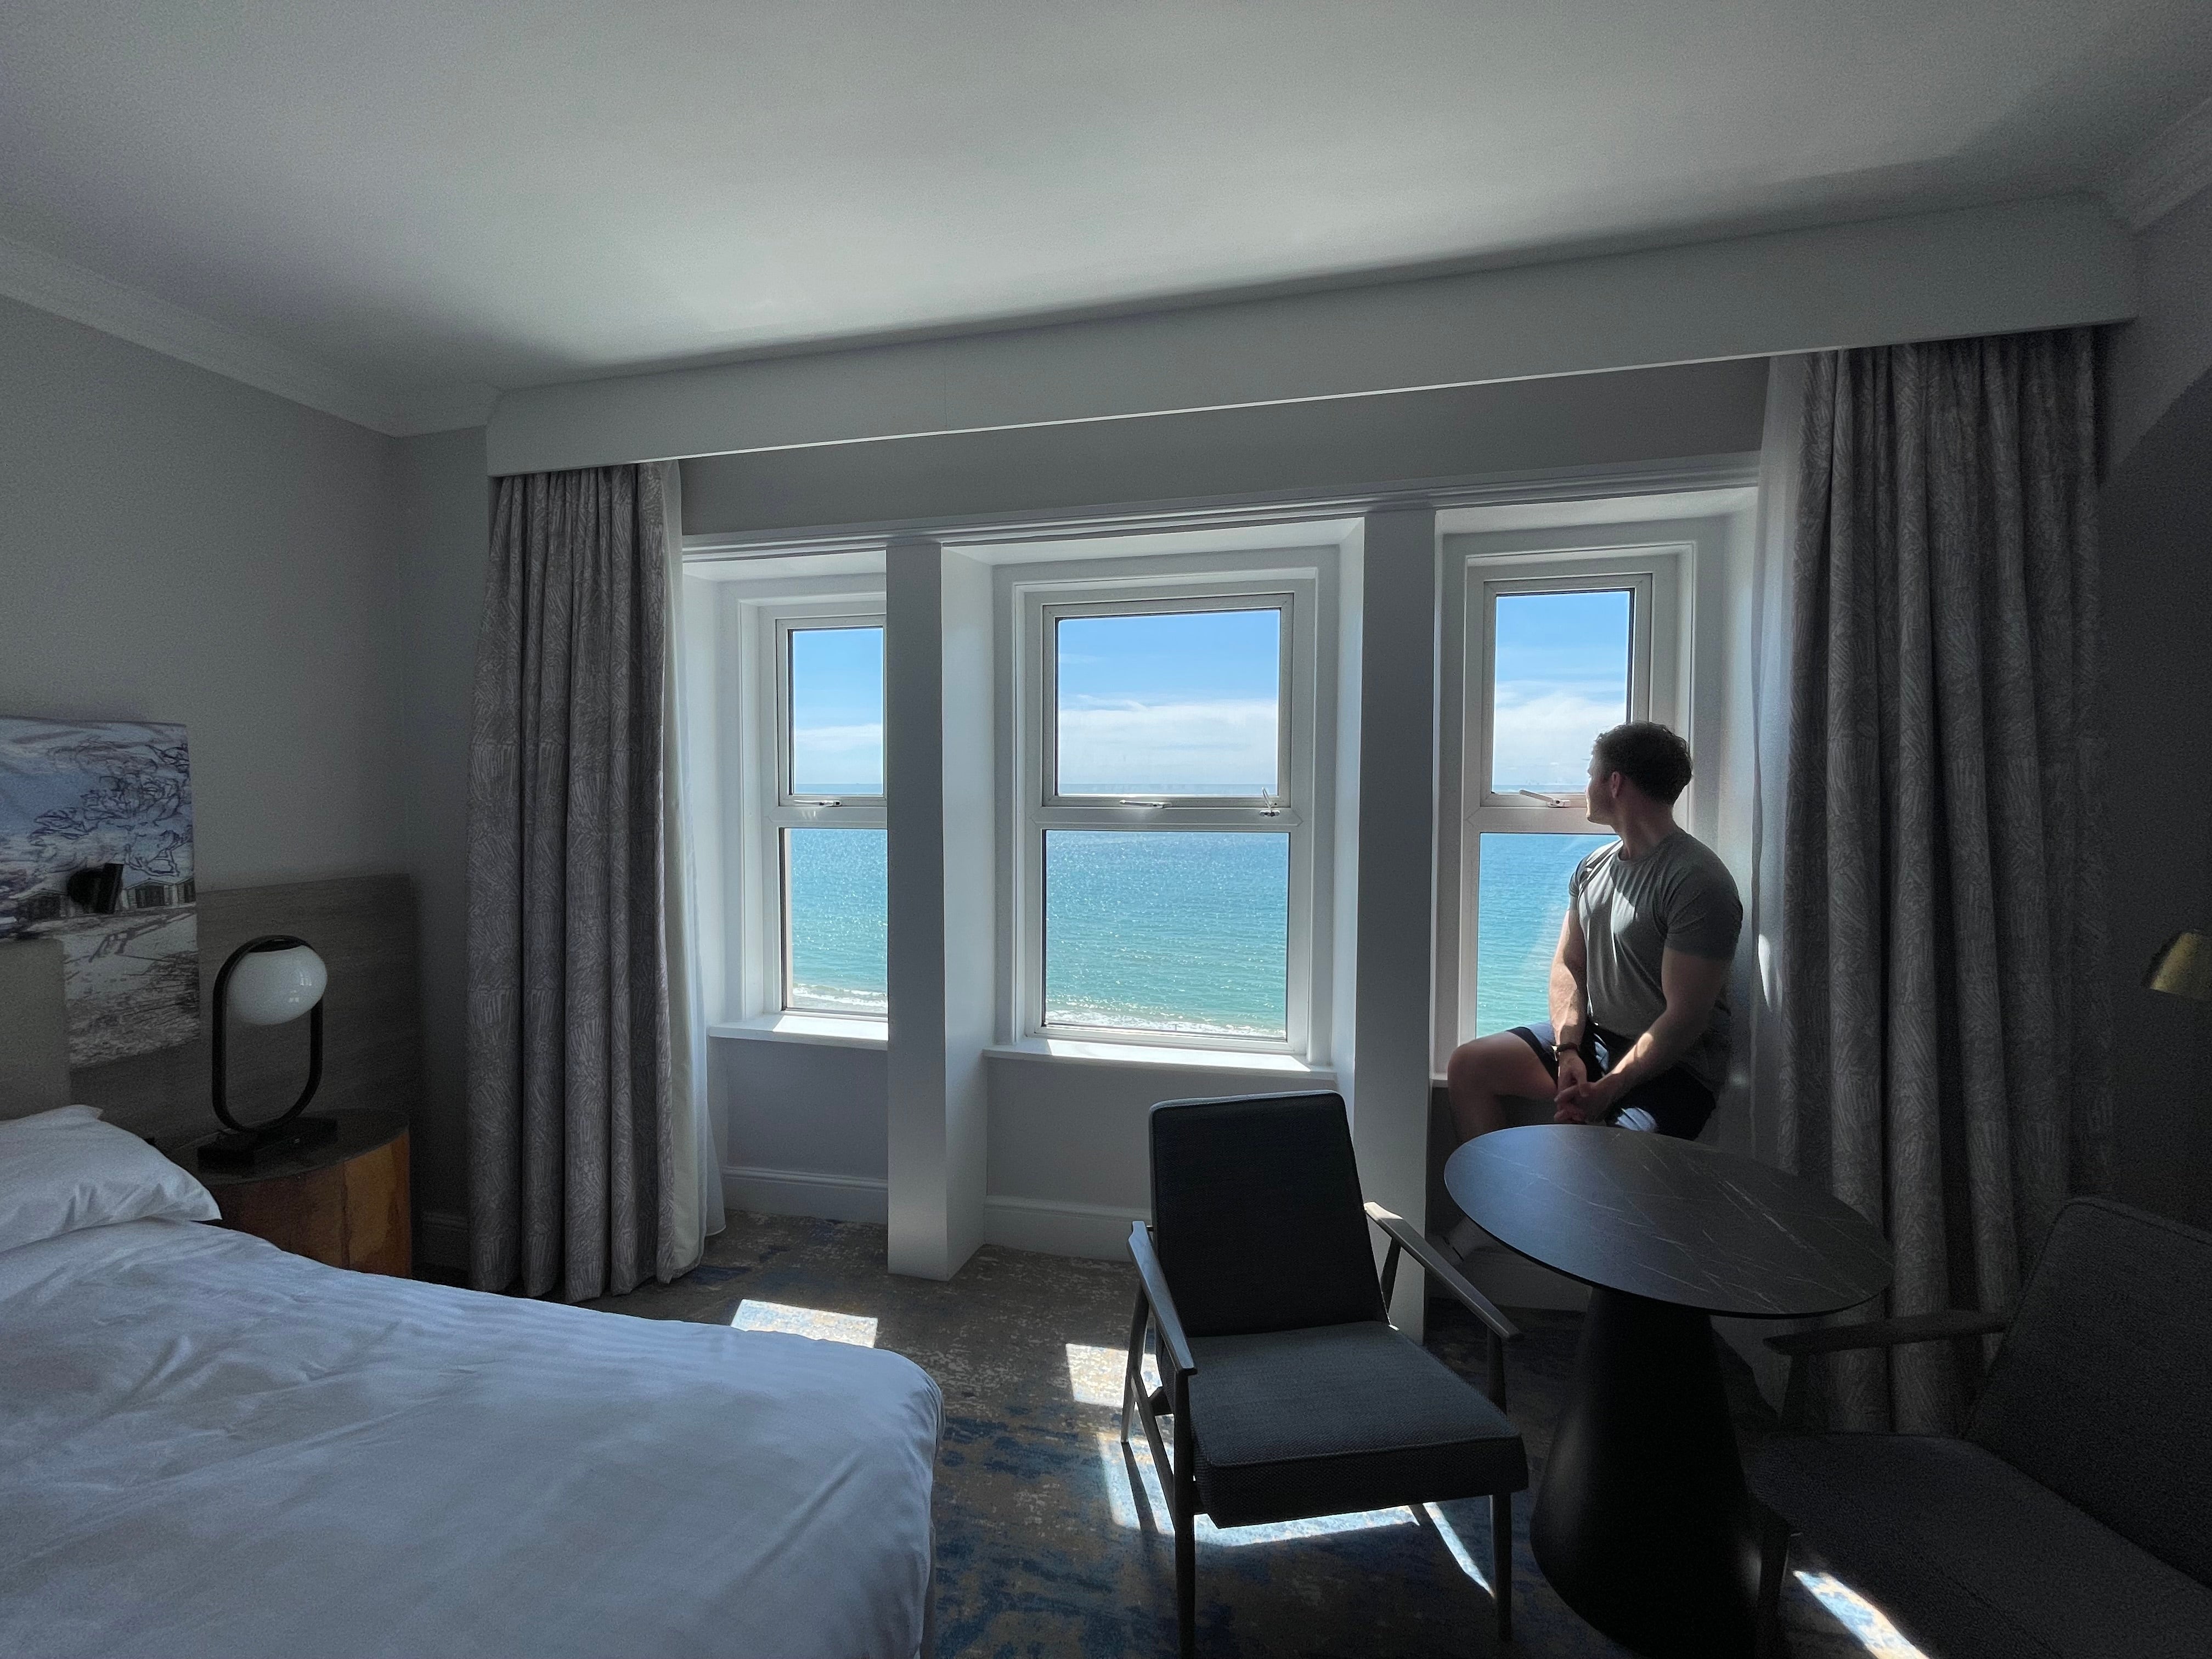 The sea views from the Marriott’s rooms are a delight to wake up to